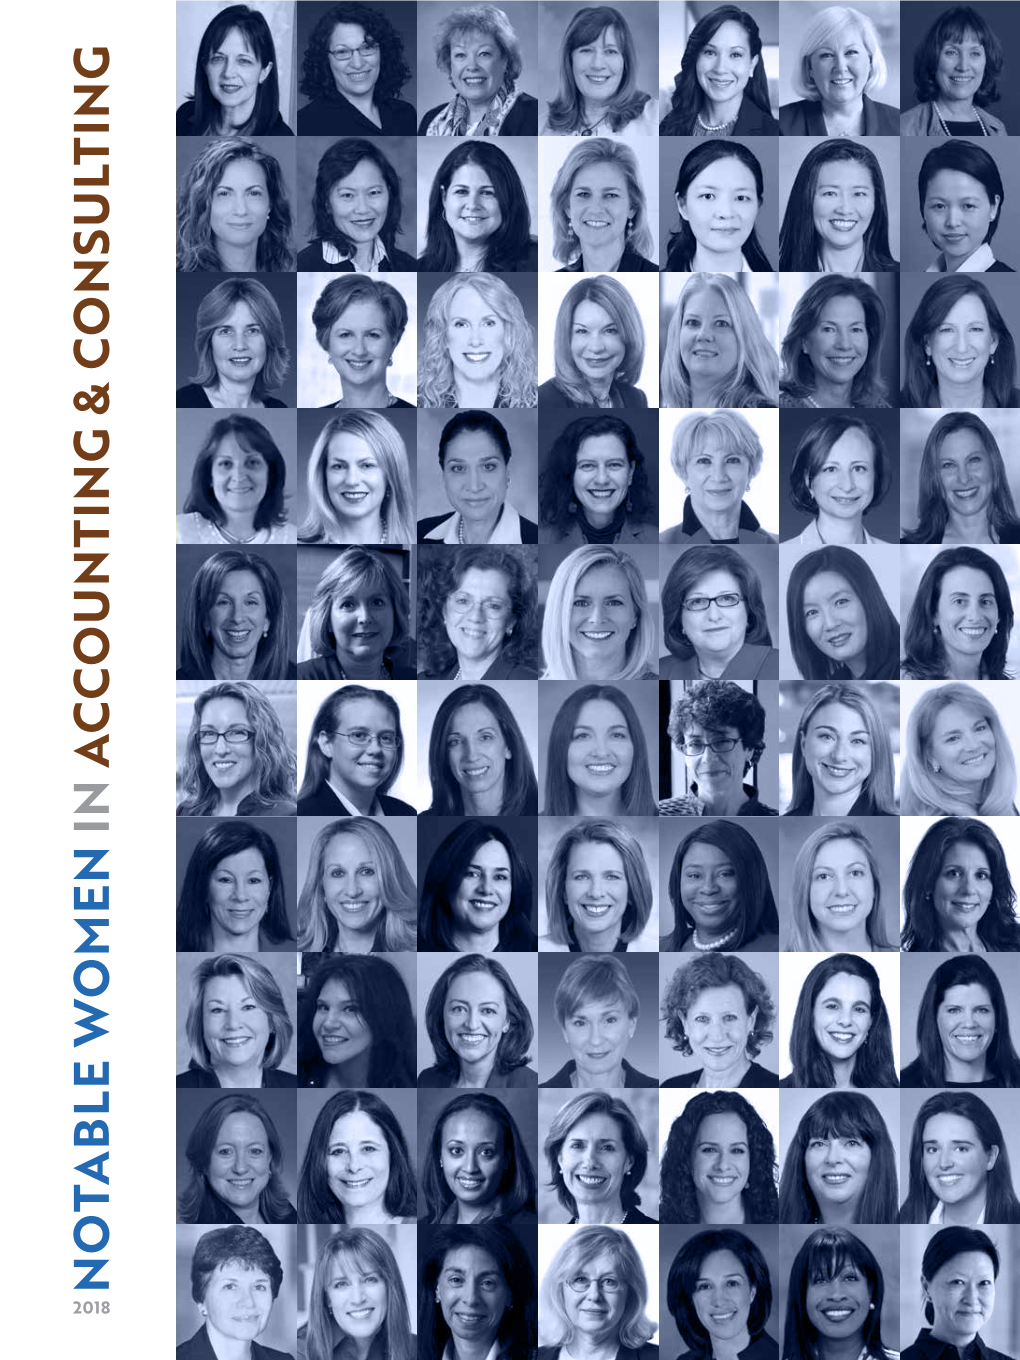 2018 Notable Women in Accounting and Consulting